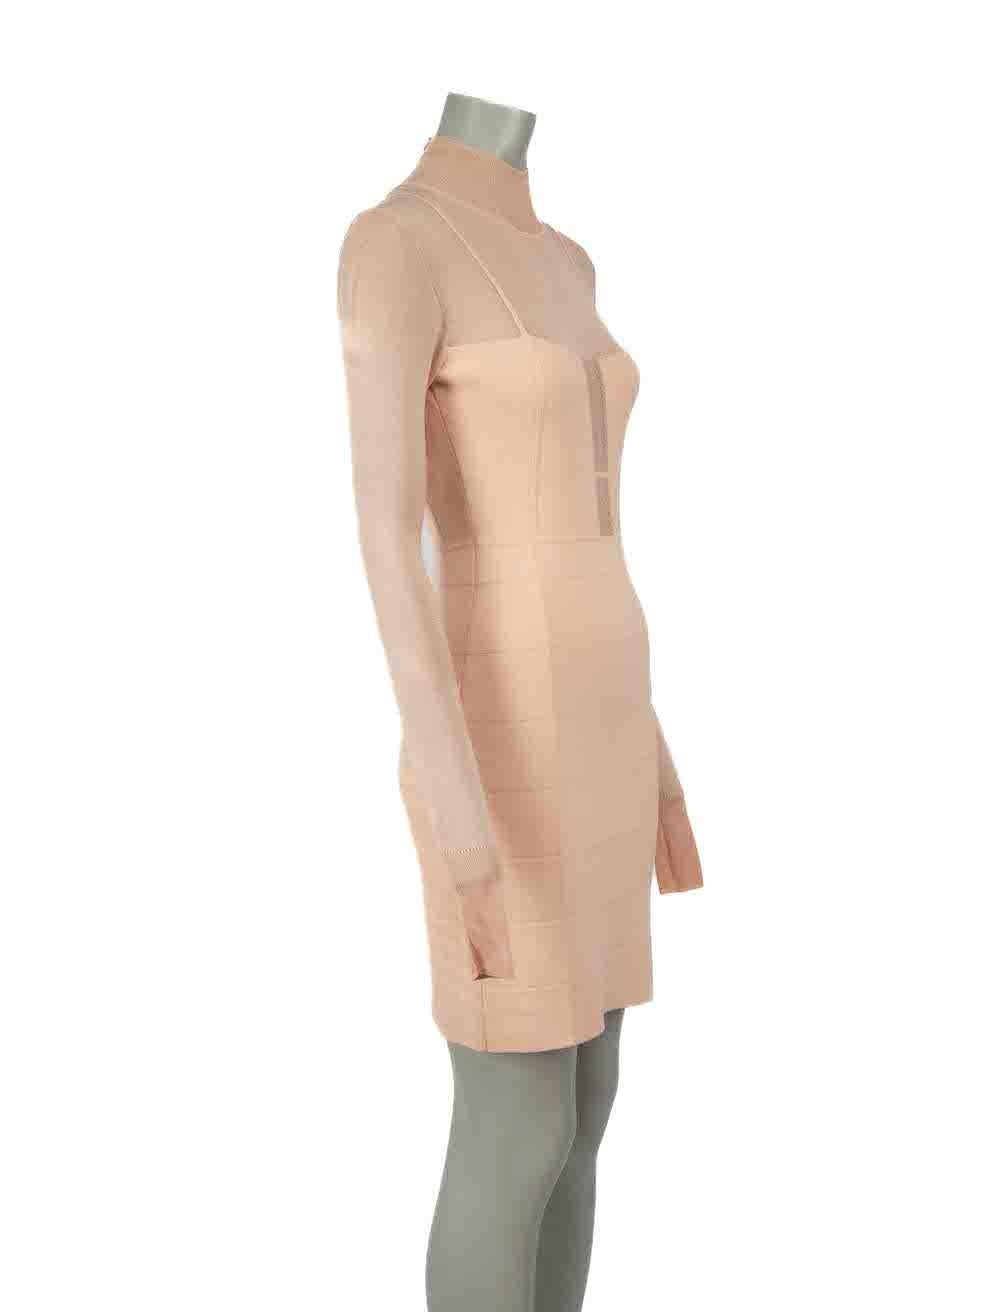 CONDITION is Never worn, with tags. No visible wear to dress is evident on this new Herve Leger designer resale item.

Details
Pink
Viscose
Bodycon dress
Long sleeves
Mini
Figure hugging fit
Stretchy
Mini
Turtle neck
Back zip and hook